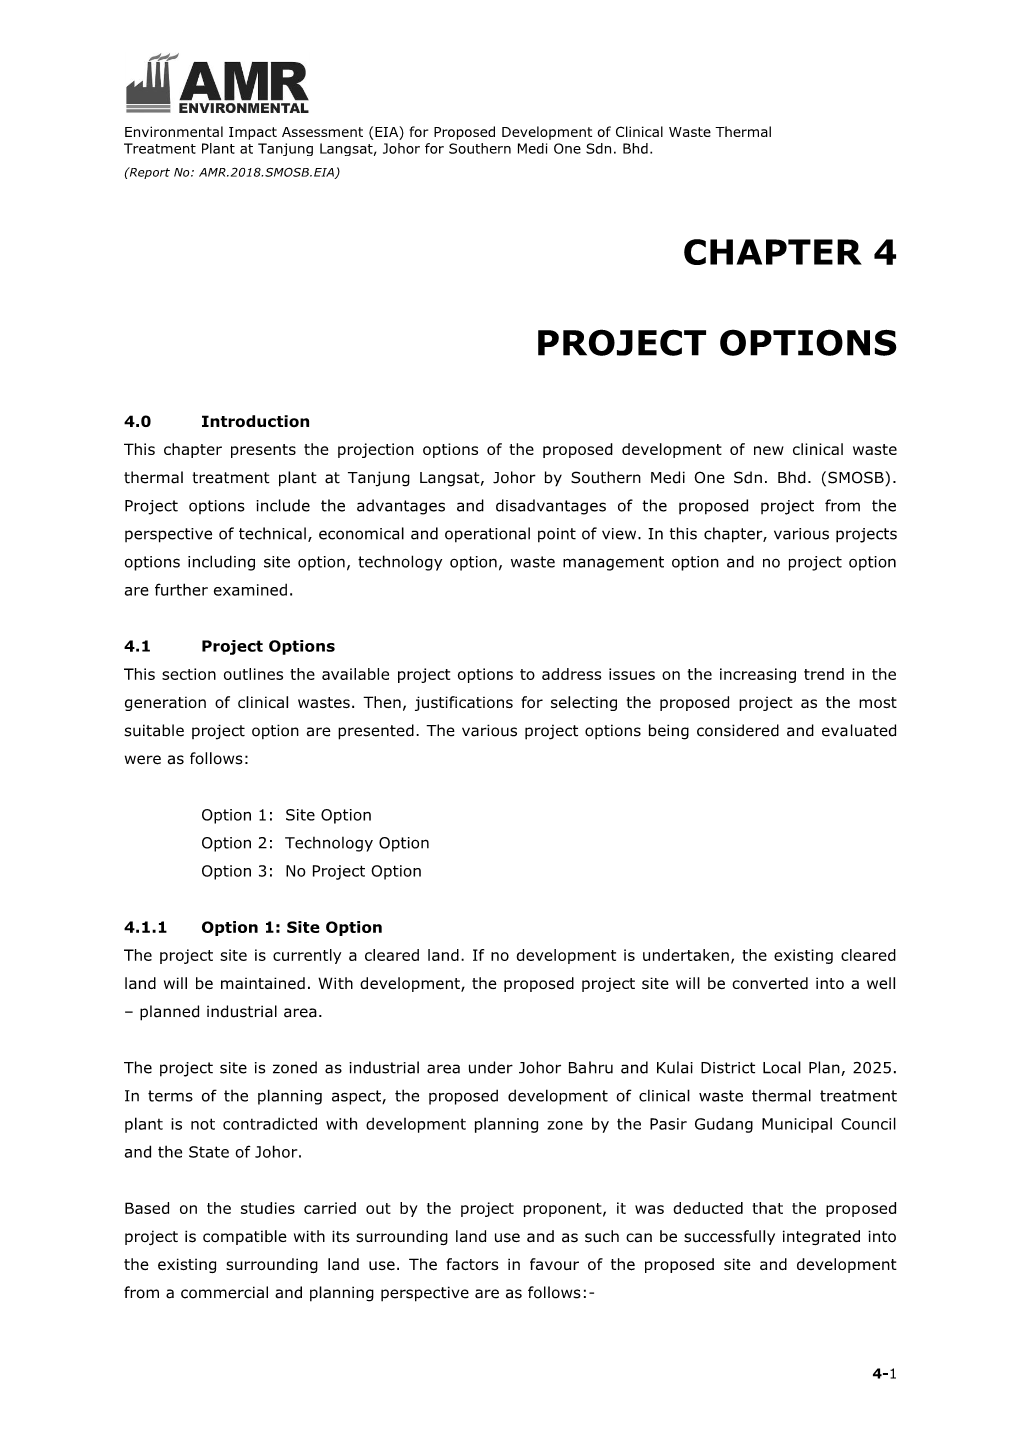 Chapter 4 Project Options